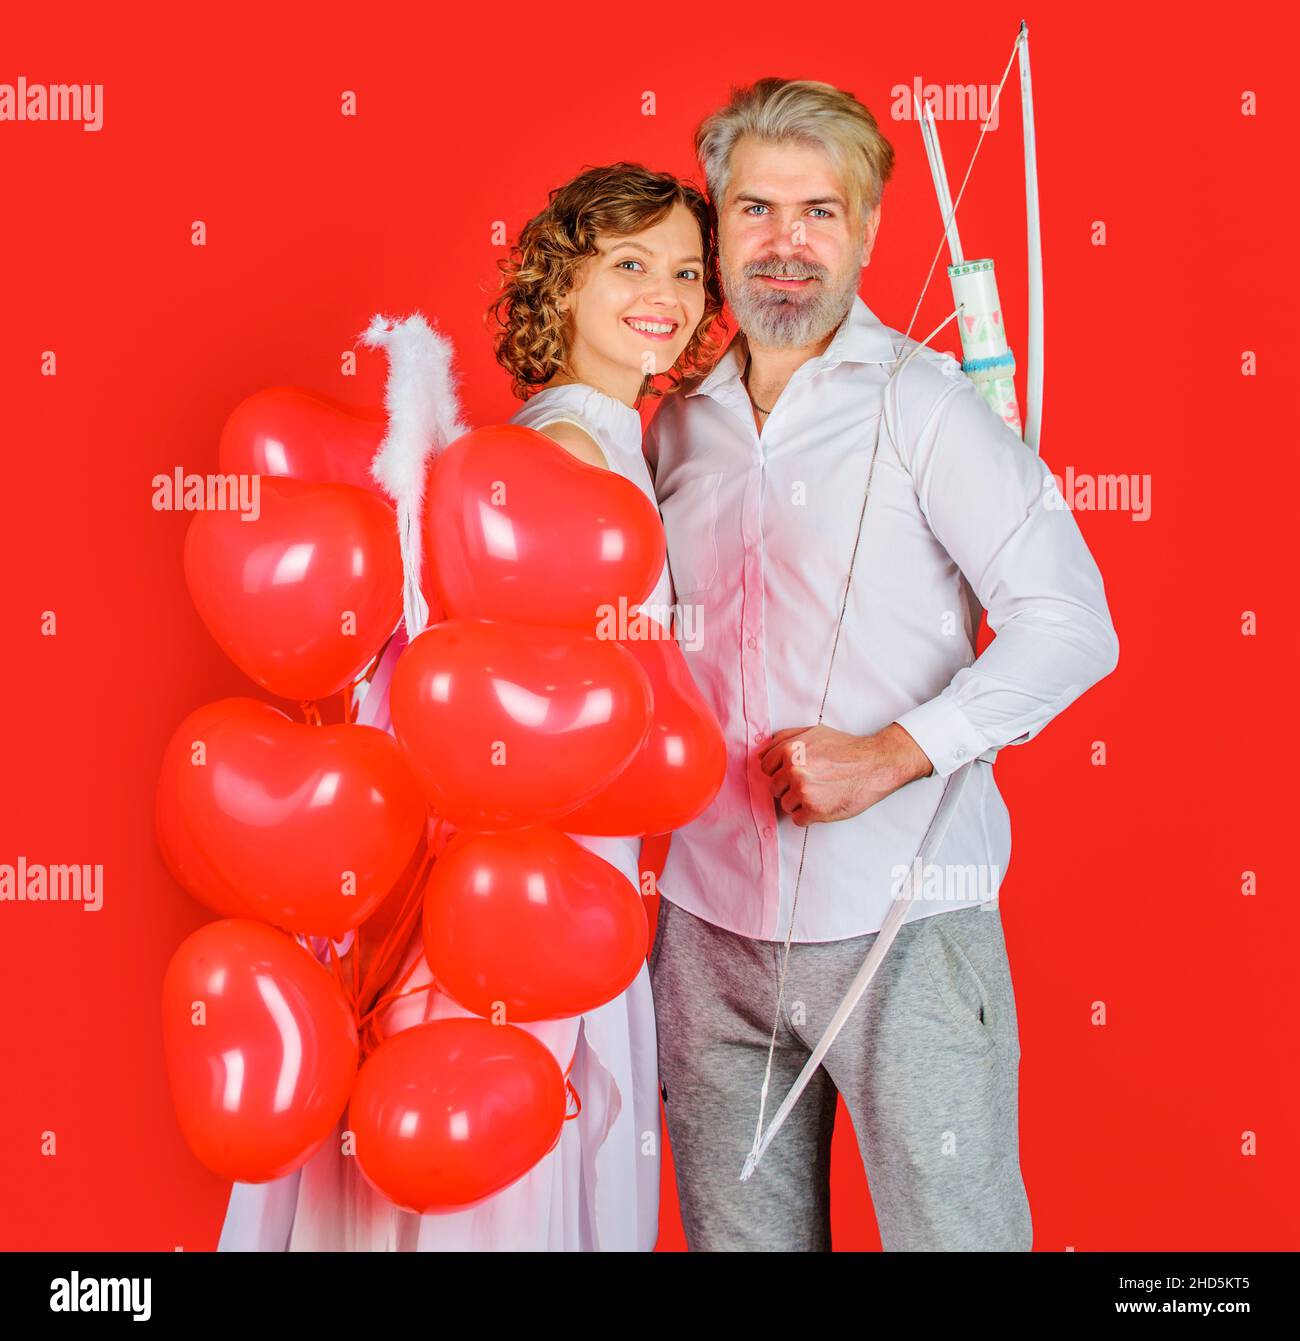 Valentines Day couple. Smiling Angel girl with balloons, happy bearded man with bow and arrows Stock Photo